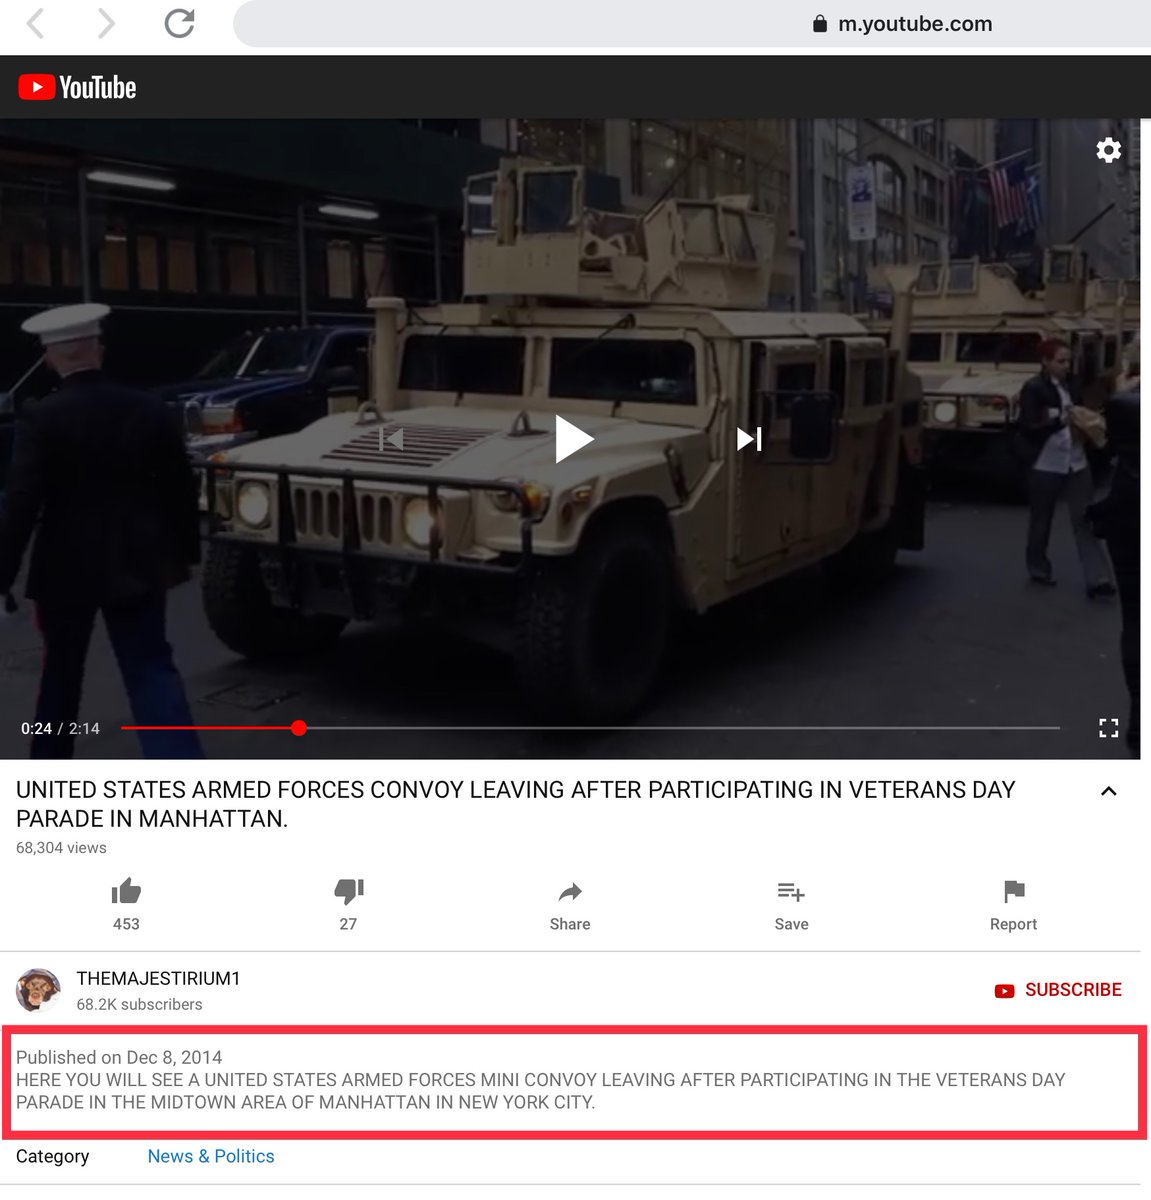 Sorry for the disjointed YouTube videos (I’m not sufficiently caffeinated) For other researchers trying to find the various original YouTube videos, search: NYC, Veterans Day, Parade & add military Based on my observation this account & thread 